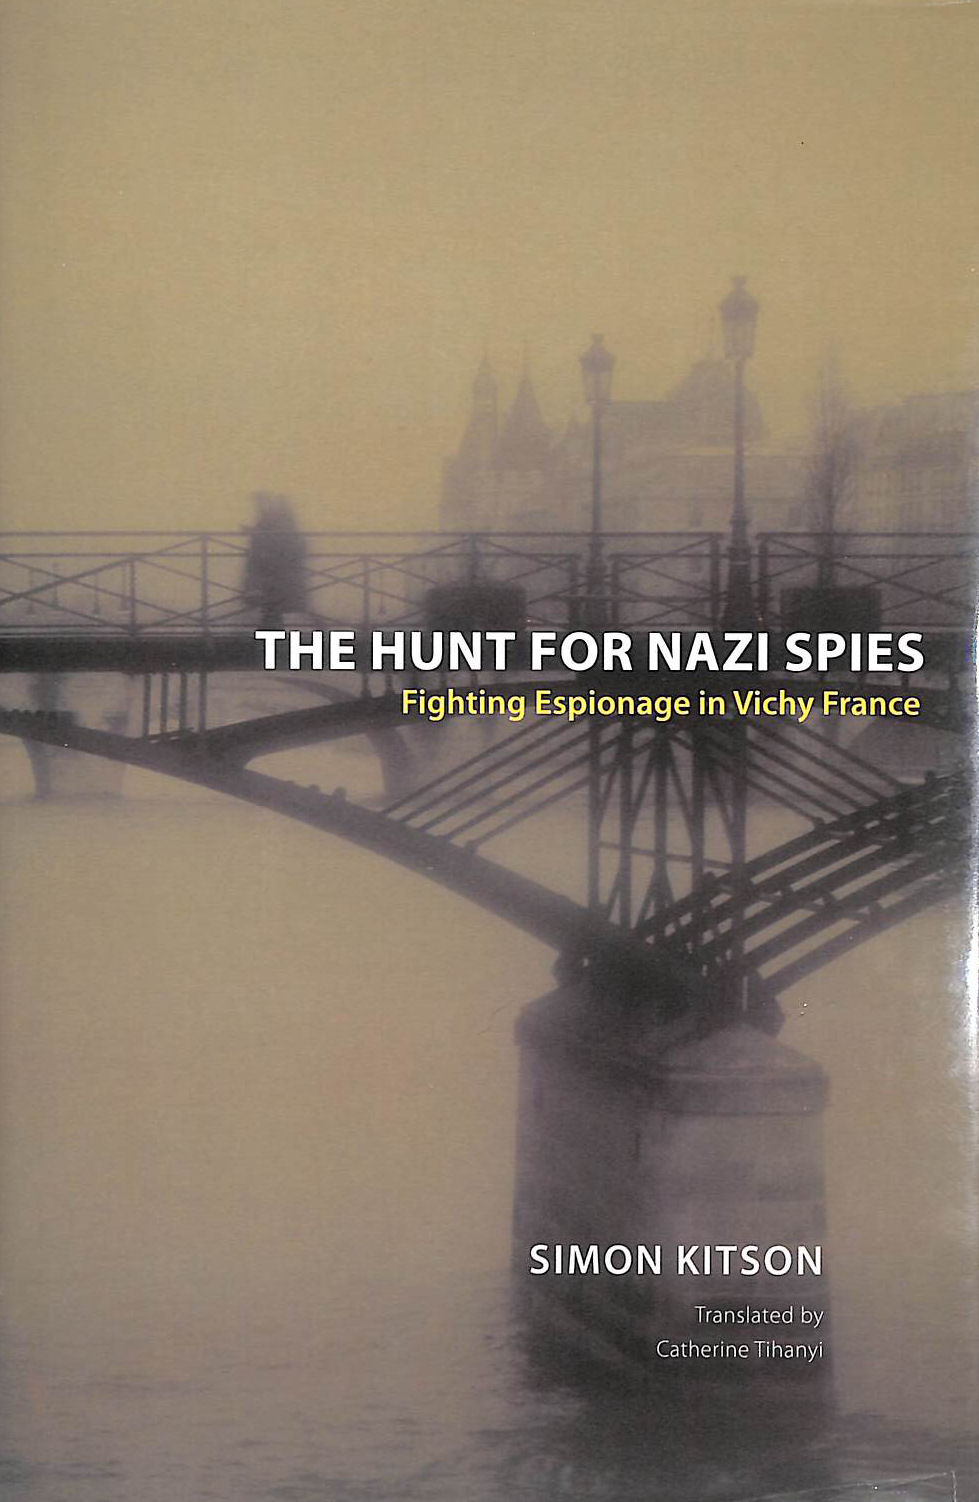 KITSON, SIMON - The Hunt for Nazi Spies: Fighting Espionage in Vichy France